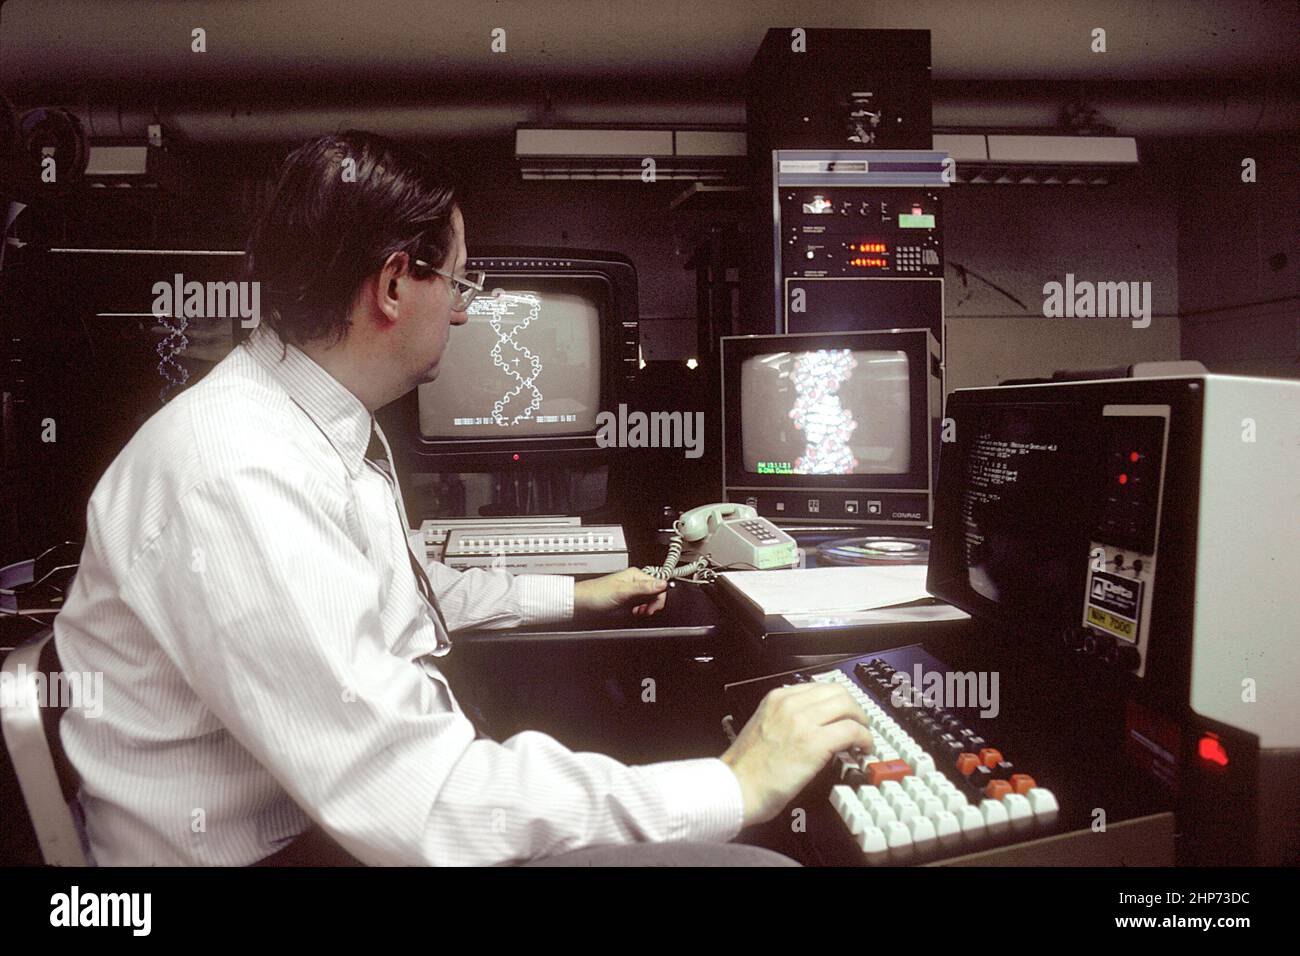 A Caucasian male technician working at a computer terminal and consulting several other screens. This technology allows for the storage and retrieval of vast amounts of information needed for cancer research. DNA structures are on the screen ca.  1980 Stock Photo